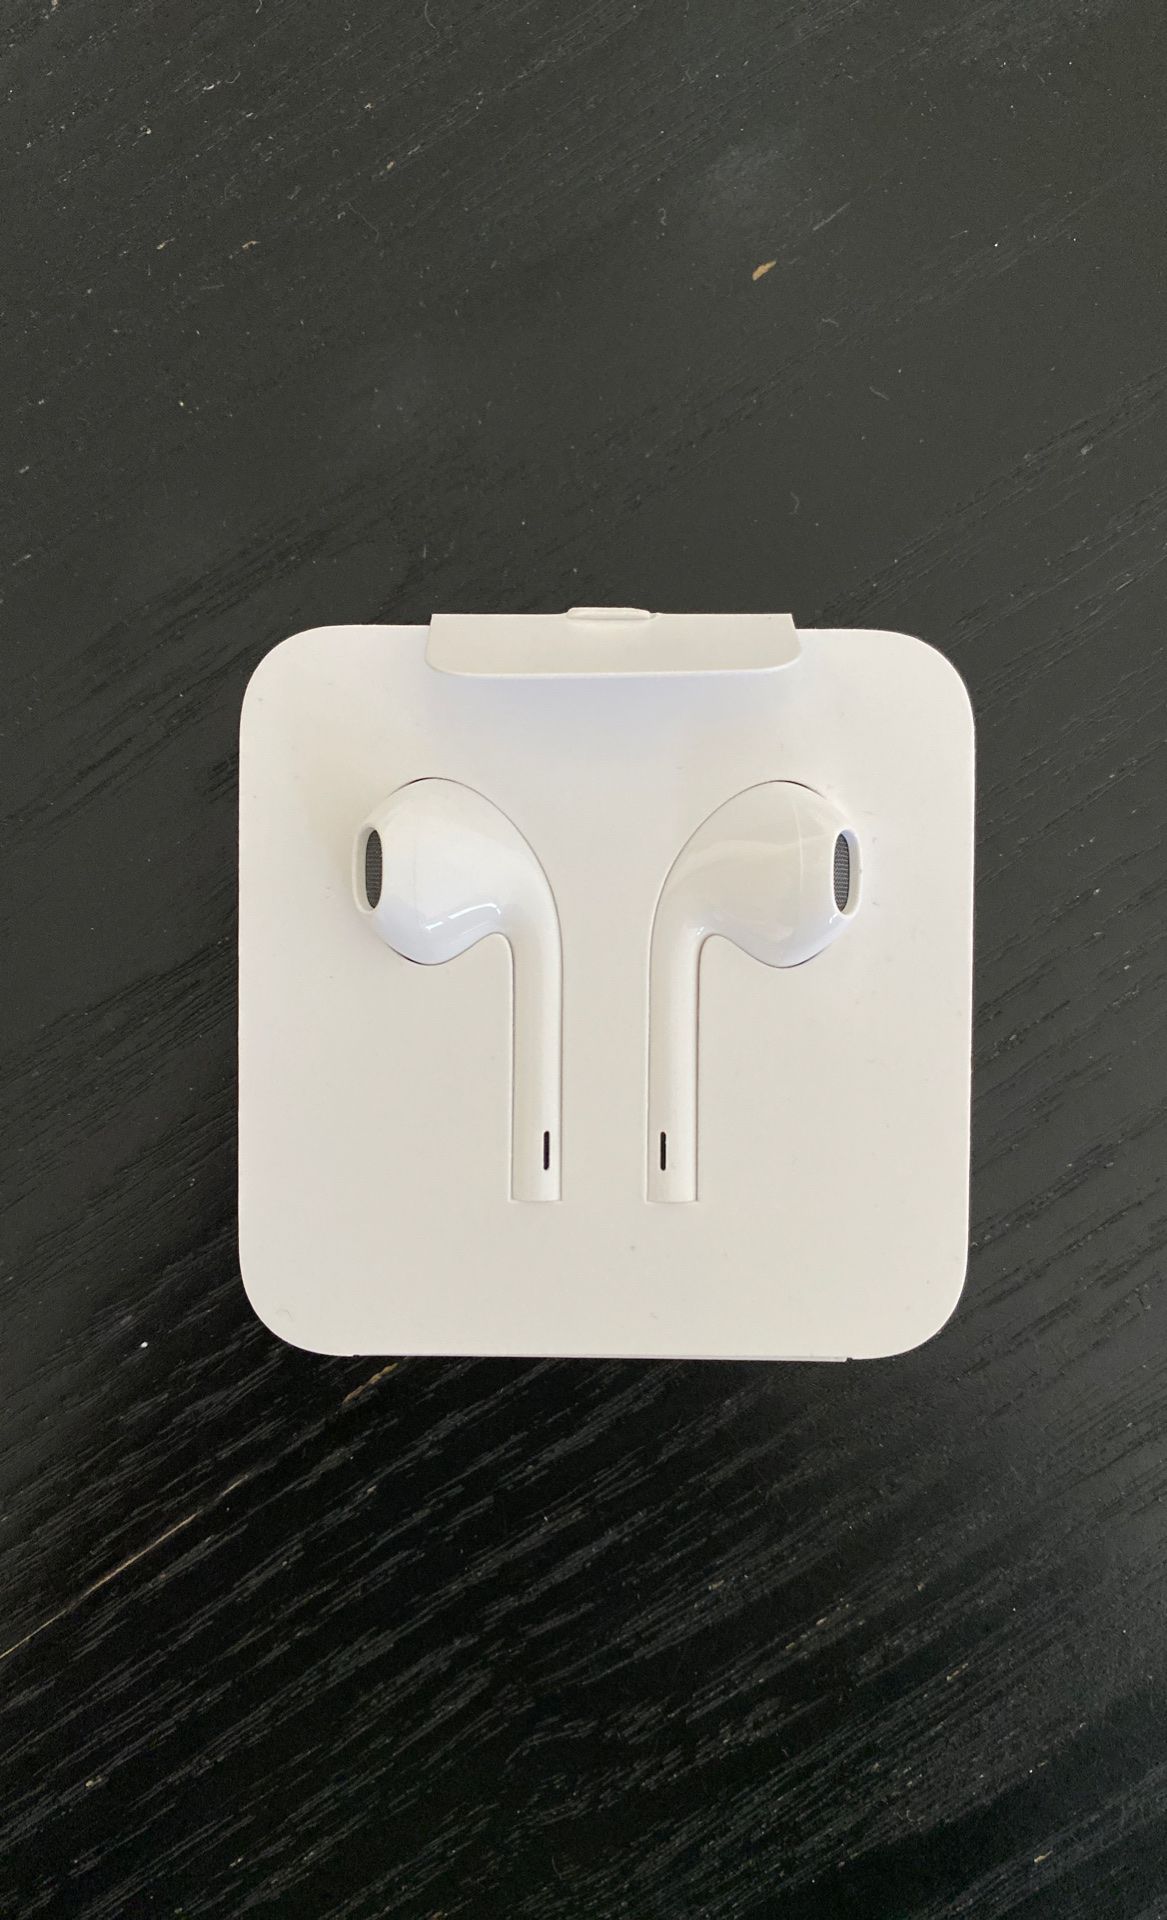 Brand new Apple earbuds - lightning connector